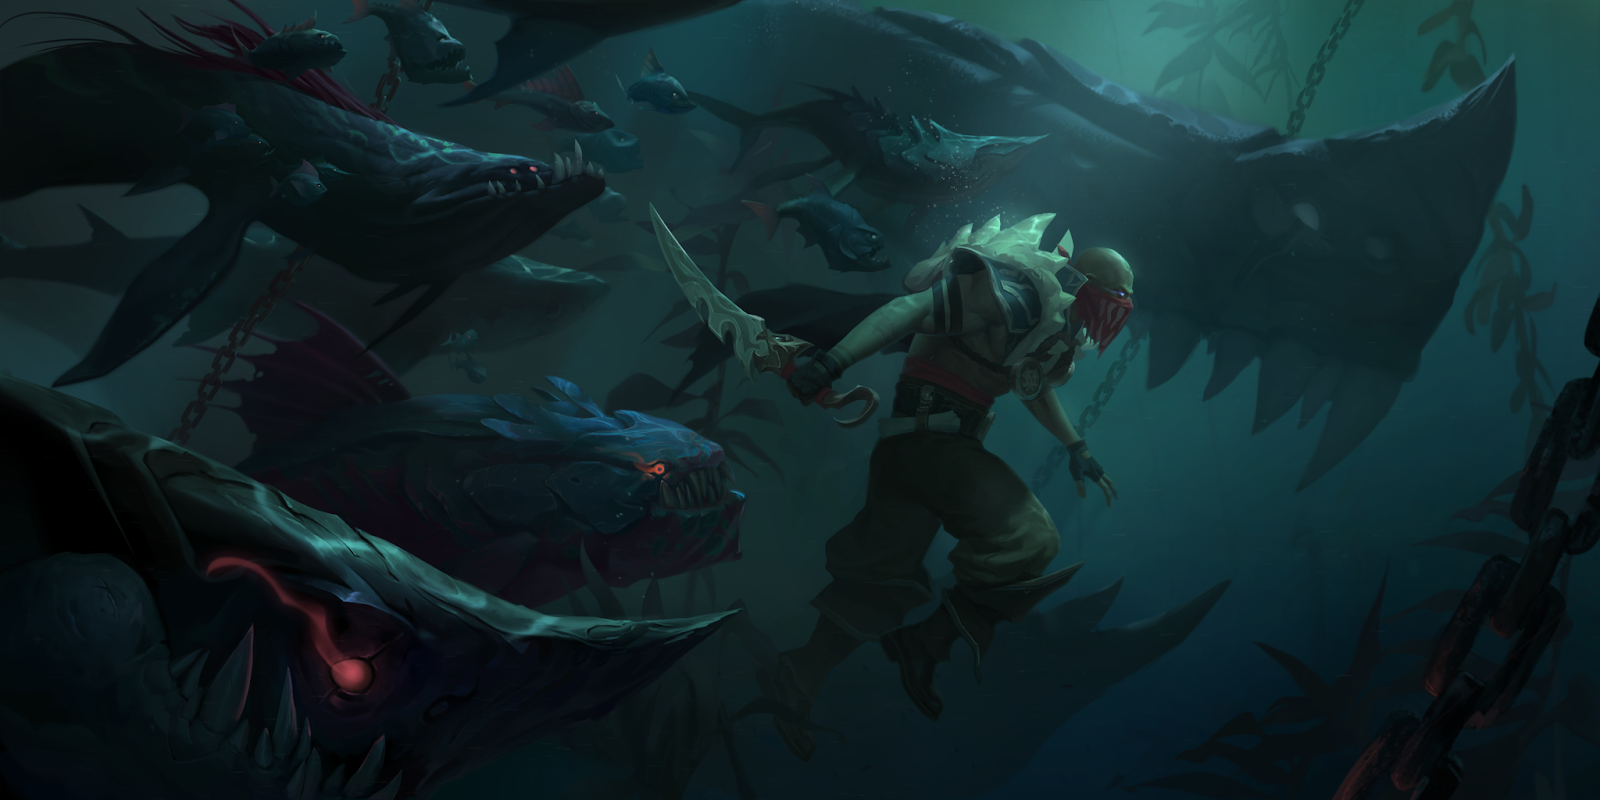 Pyke floats calmly in the water, hand around his bone skewer as lurkers and sharks circle around him. Ribbons of blood trail from his knife and show the circular trails around the lurkers.